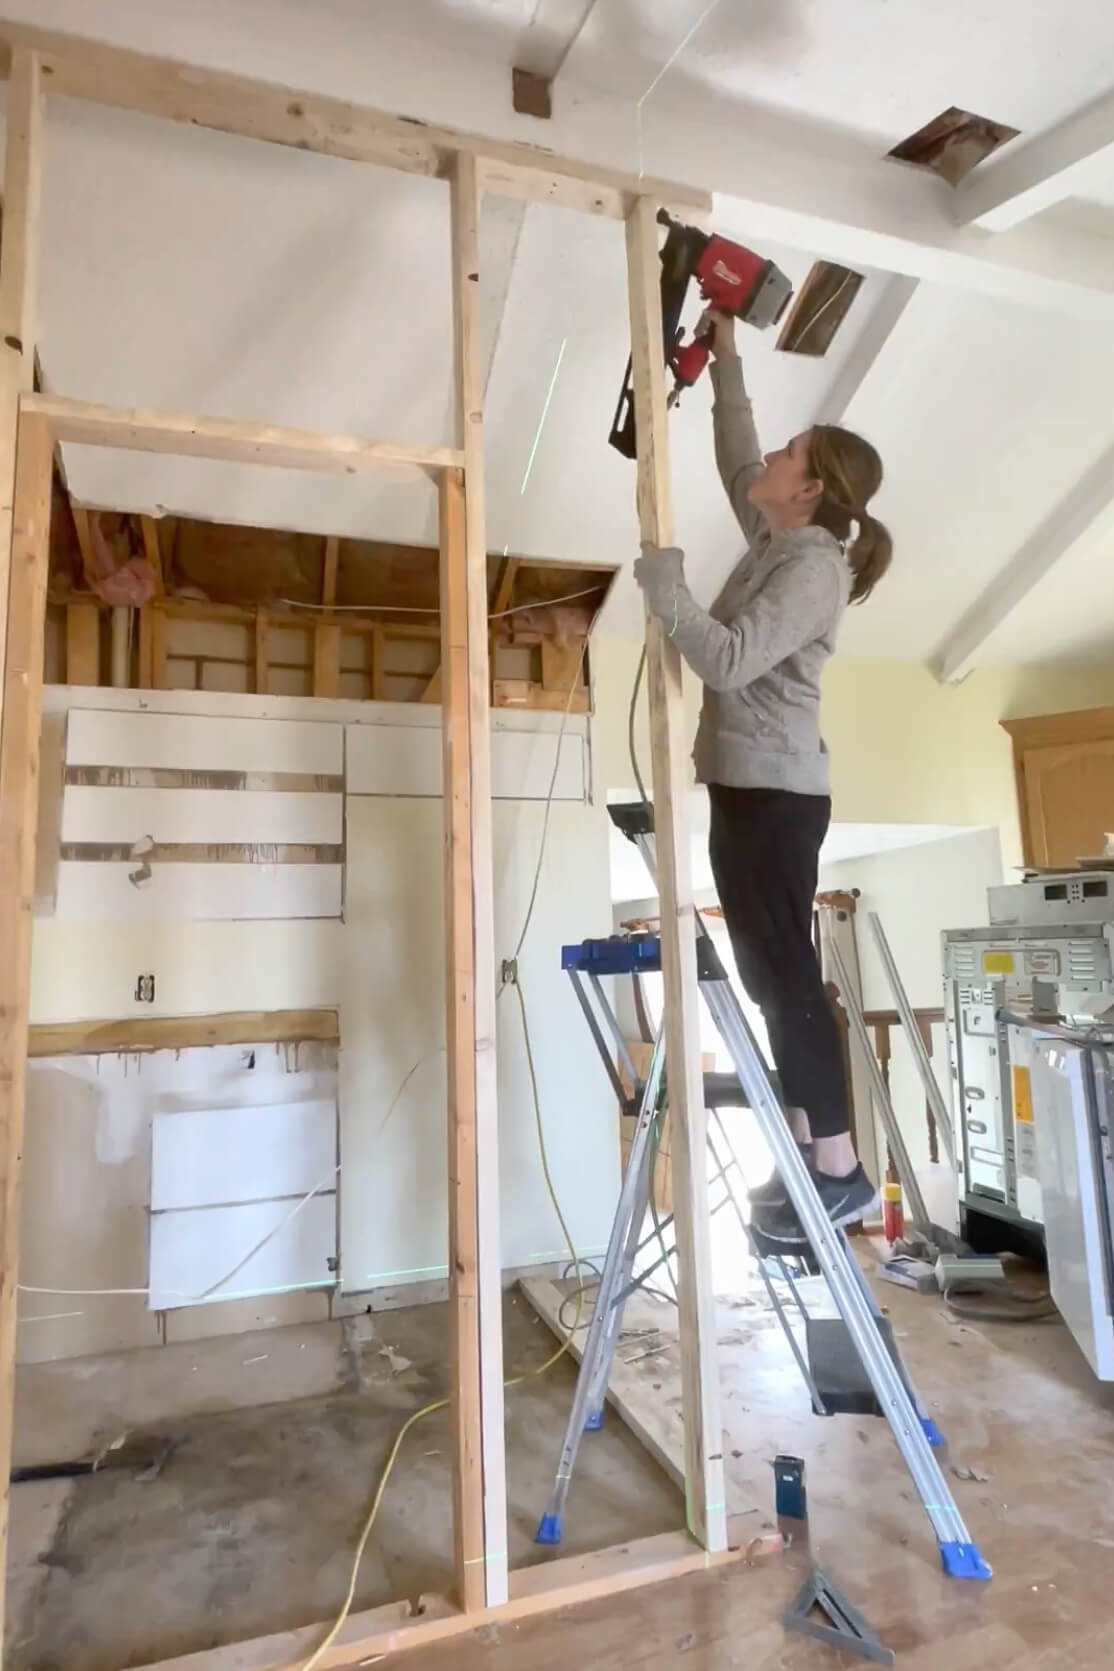 Building a pantry in a DIY kitchen remodel.